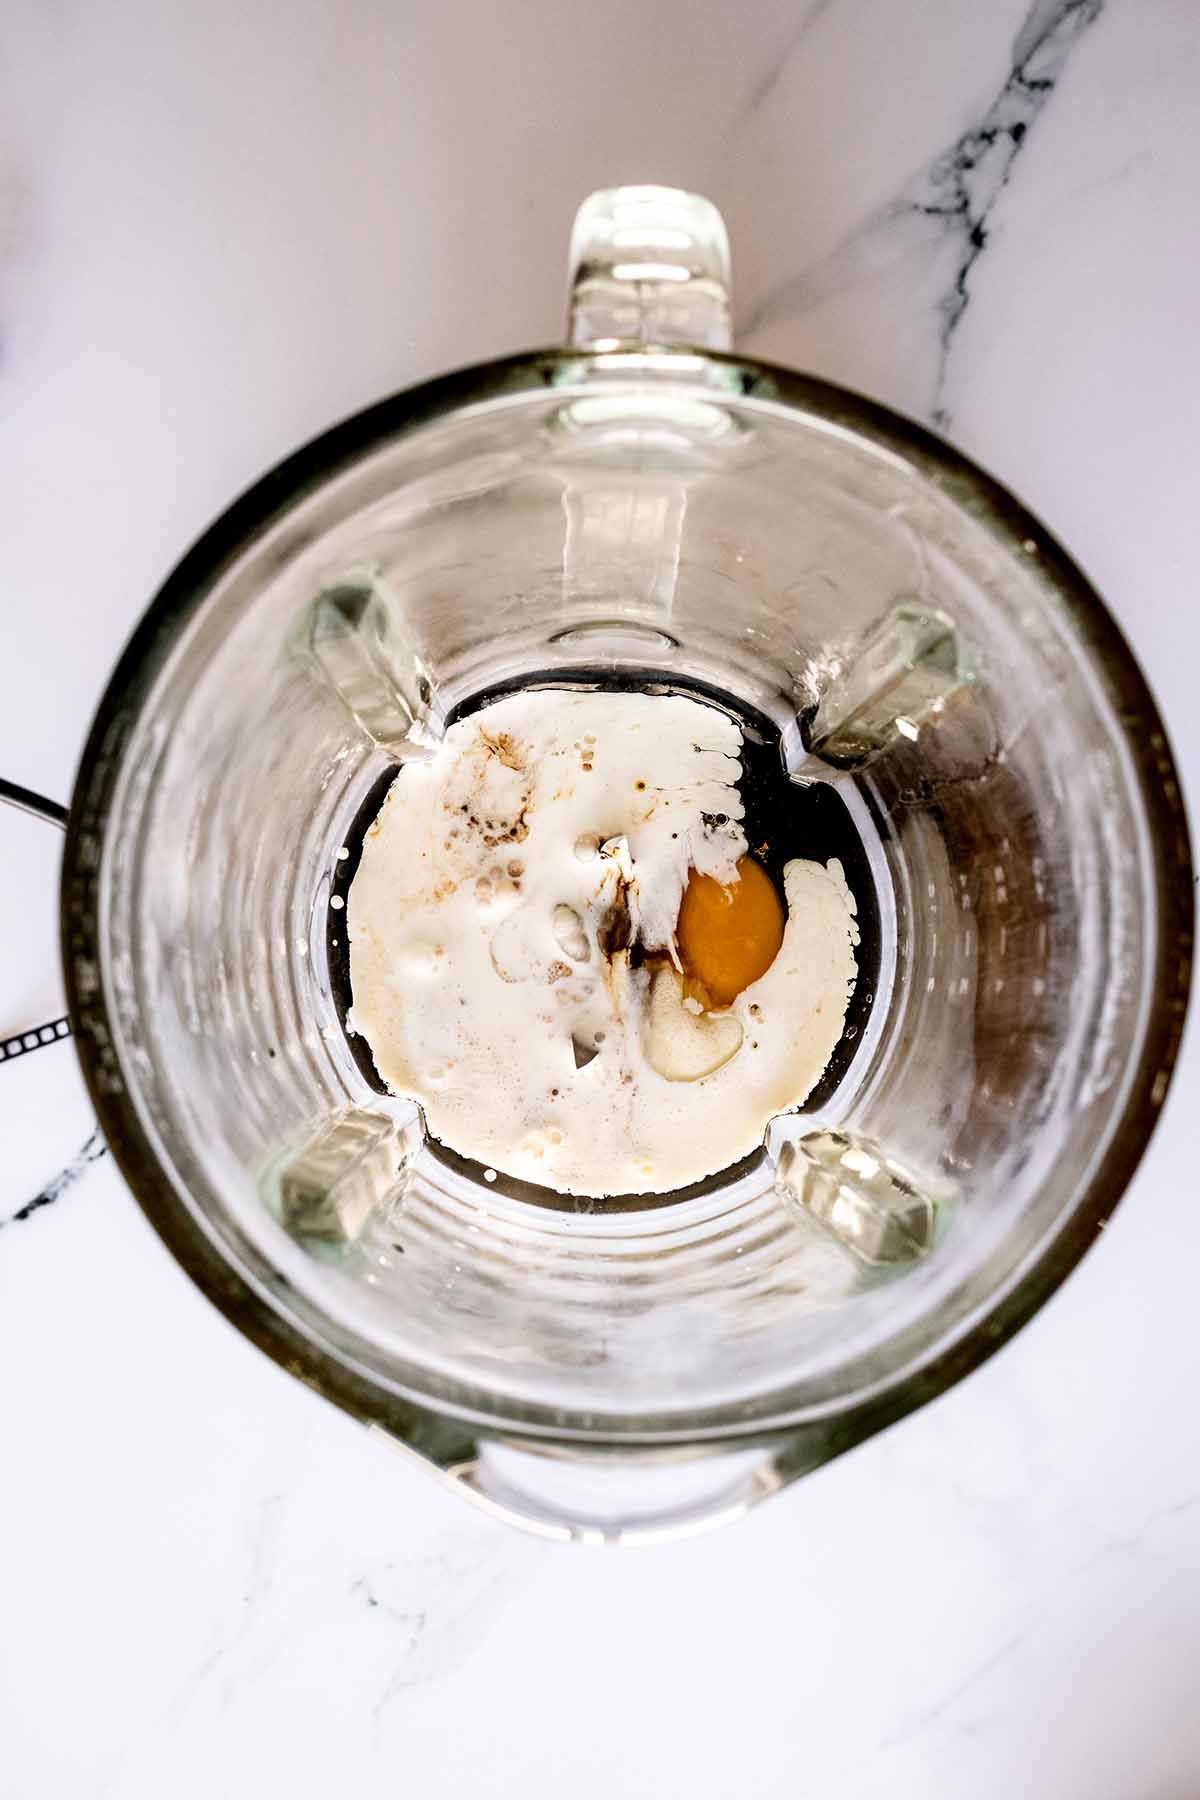 Overhead view of egg mixture in a blender